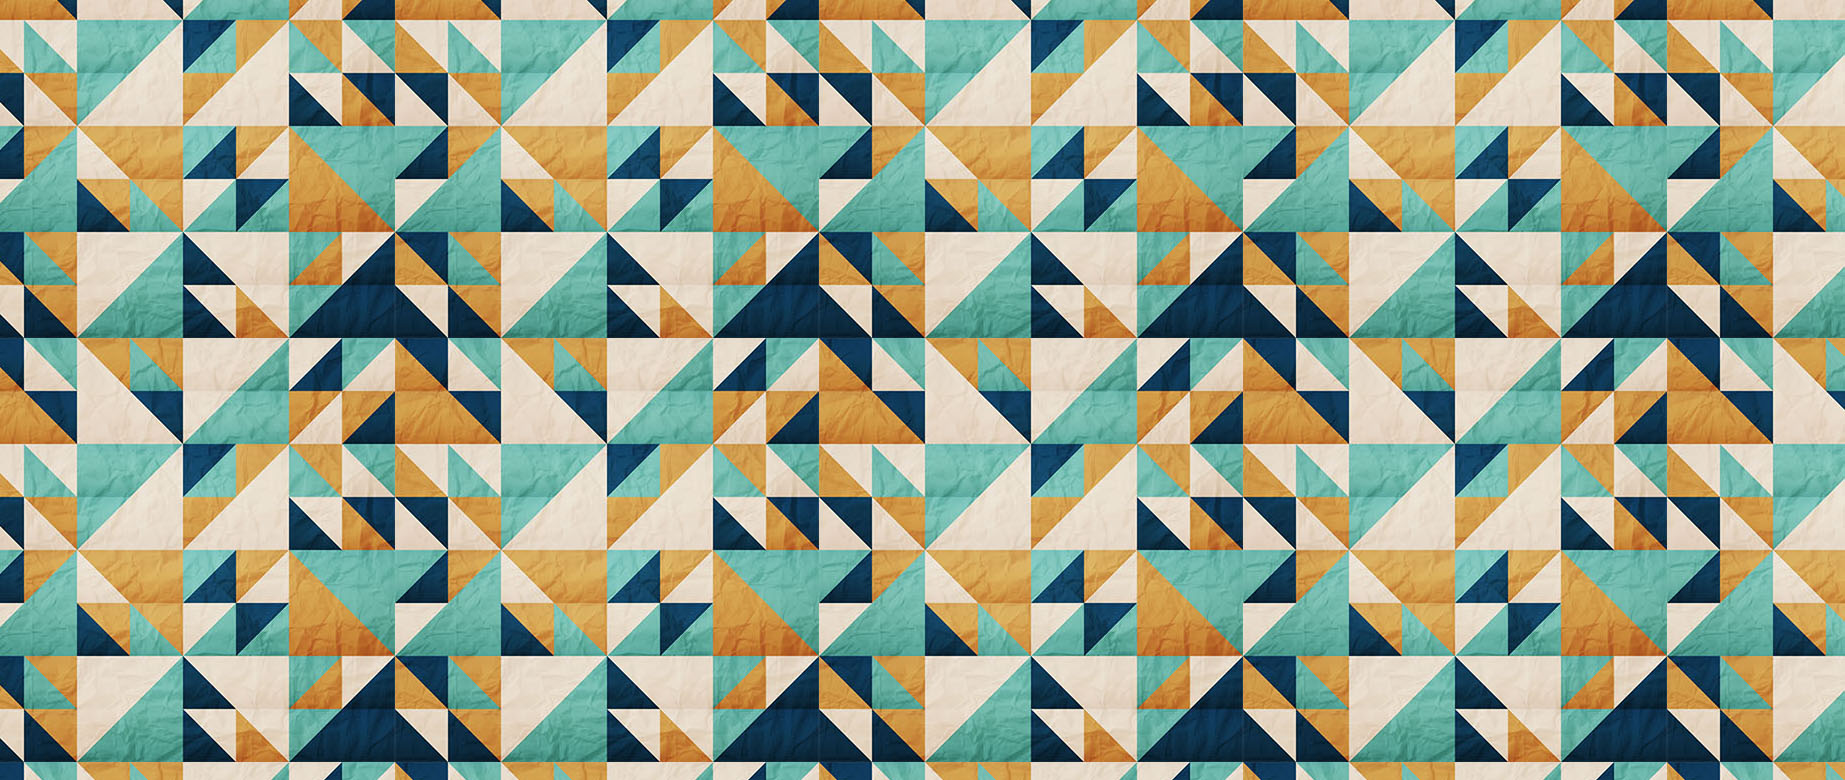 mosaic-of-abstract-triangles-wallpaper-seamless-repeat-view